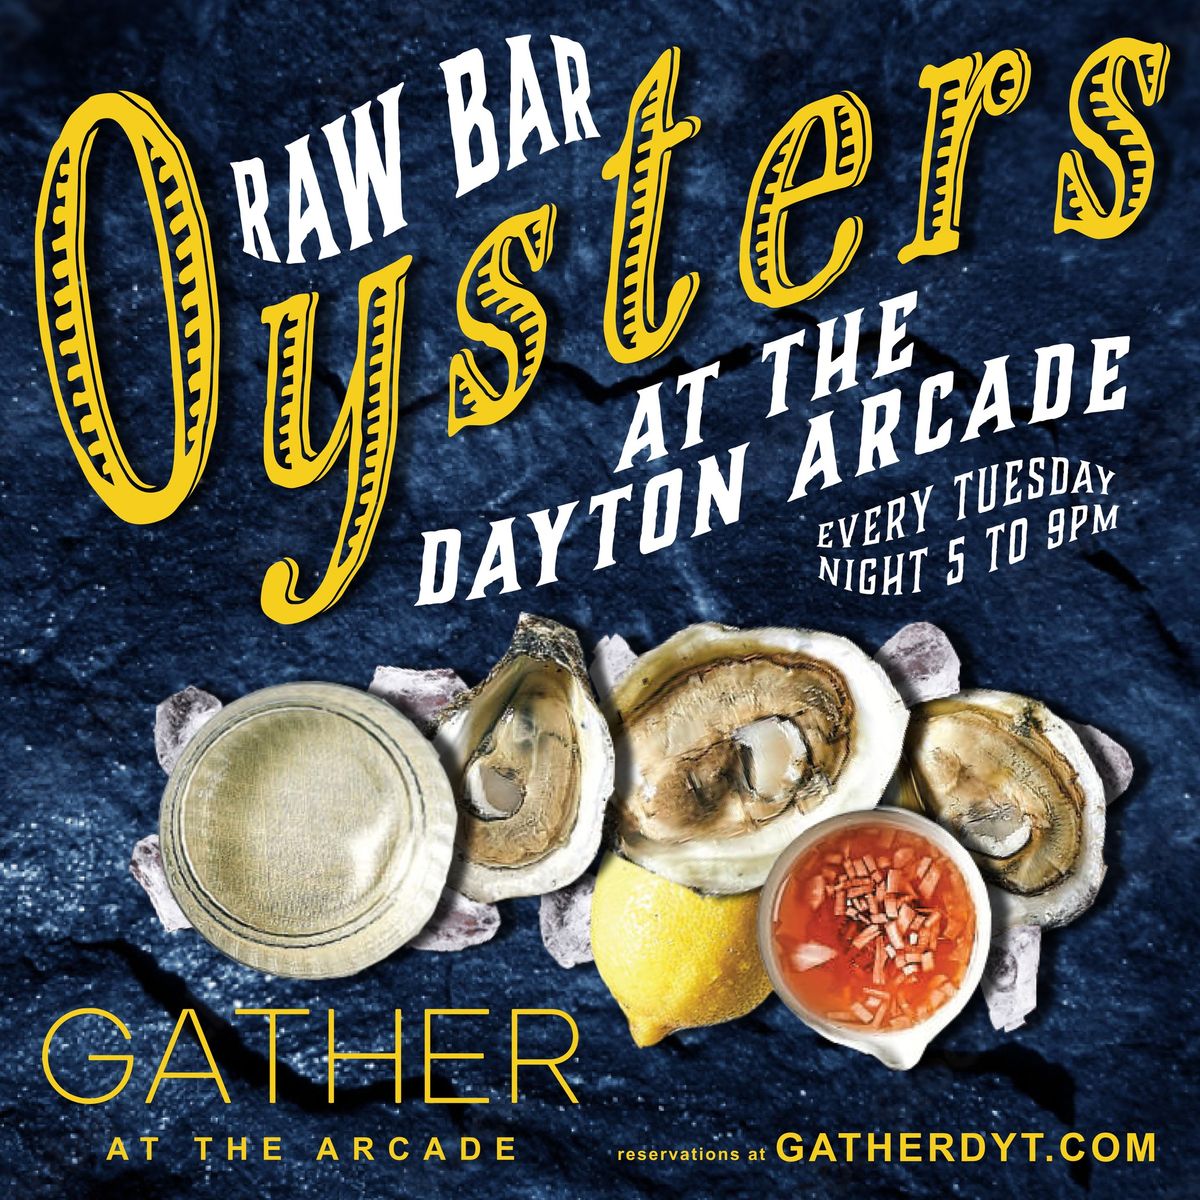 Raw Bar Oysters at The Arcade - Every Tuesday